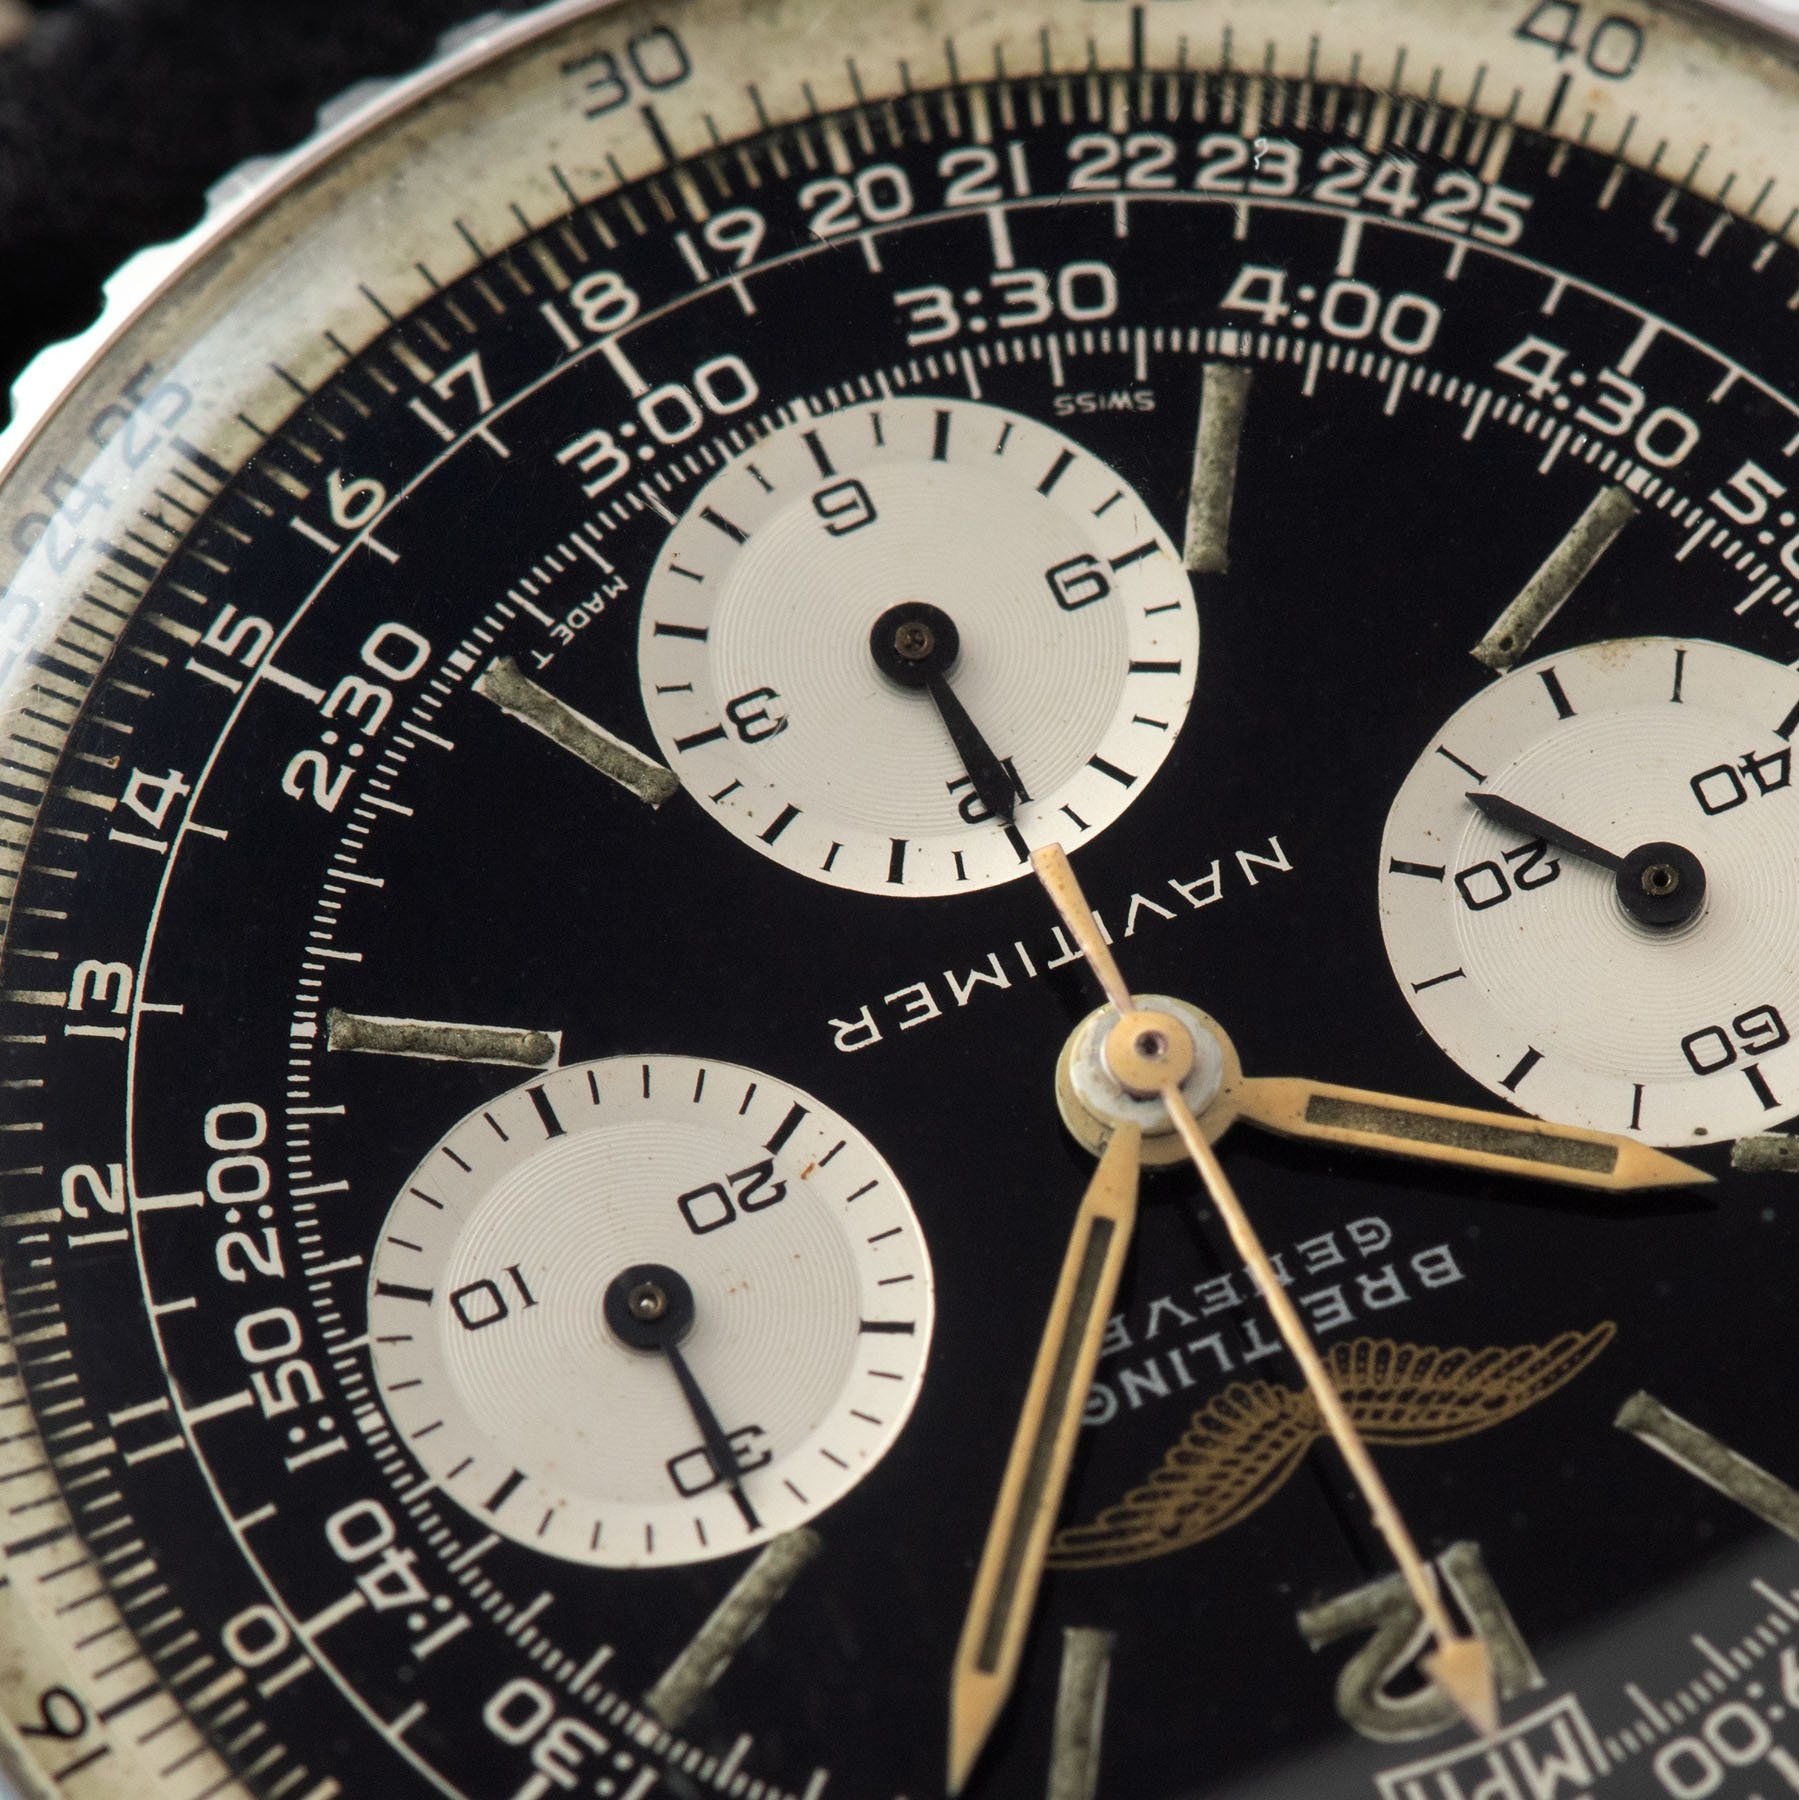 Breitling Navitimer Reference 806 Iraqi Air Force Issued